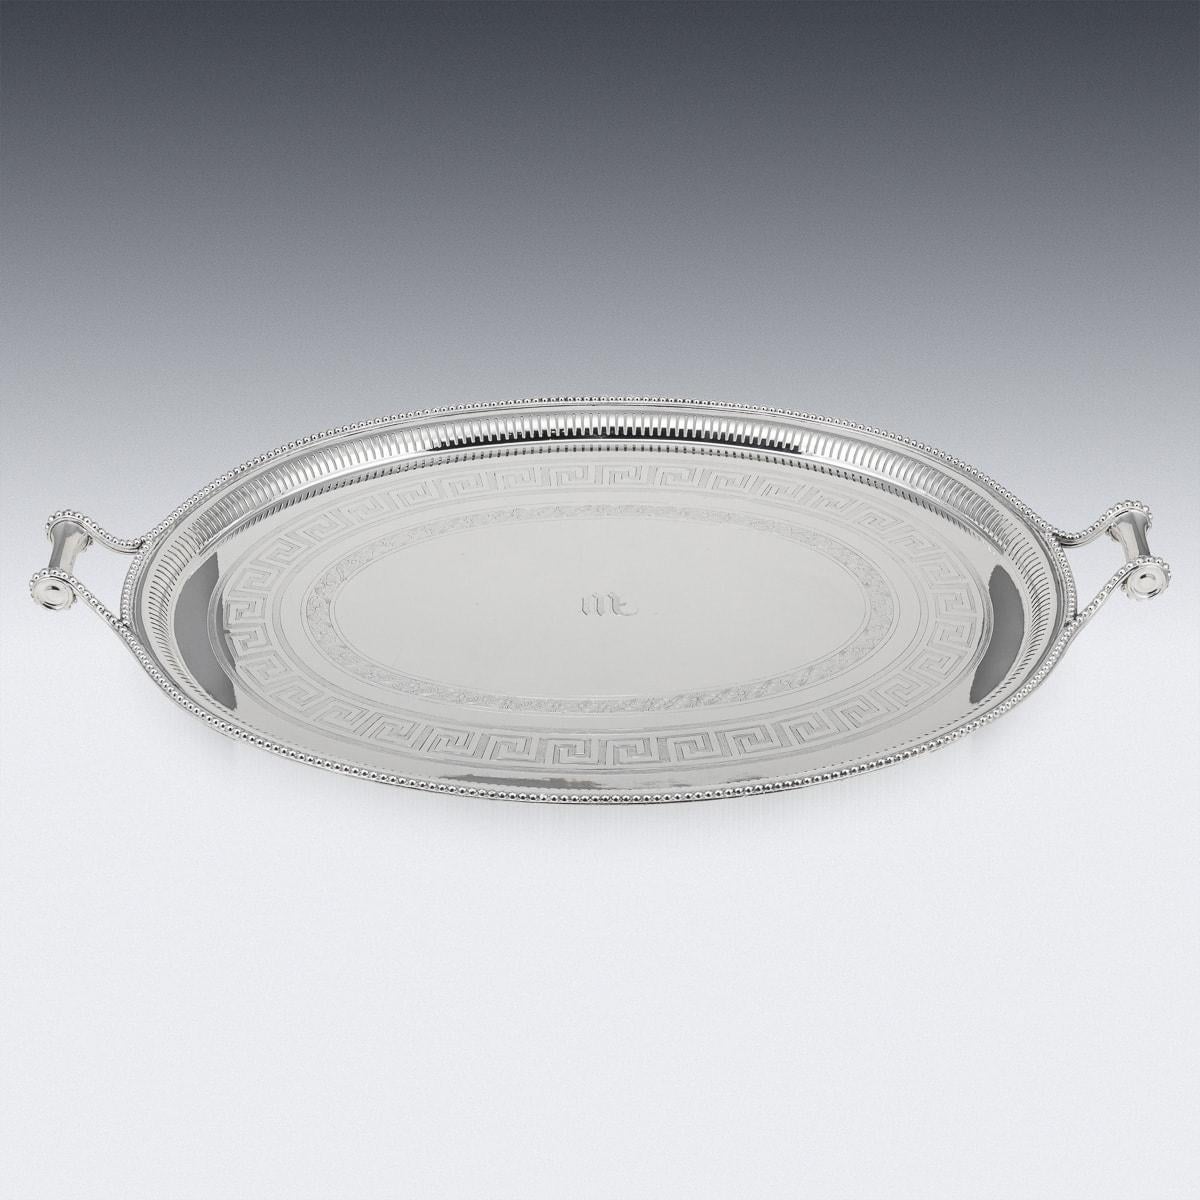 Antique early 20th Century silver plated large oval serving tray, featuring a Greek key border and intricately turned handles. Crafted by the renowned silversmiths James Dixon & Sons of Sheffield, it bears the serial number 199 and the initial M at